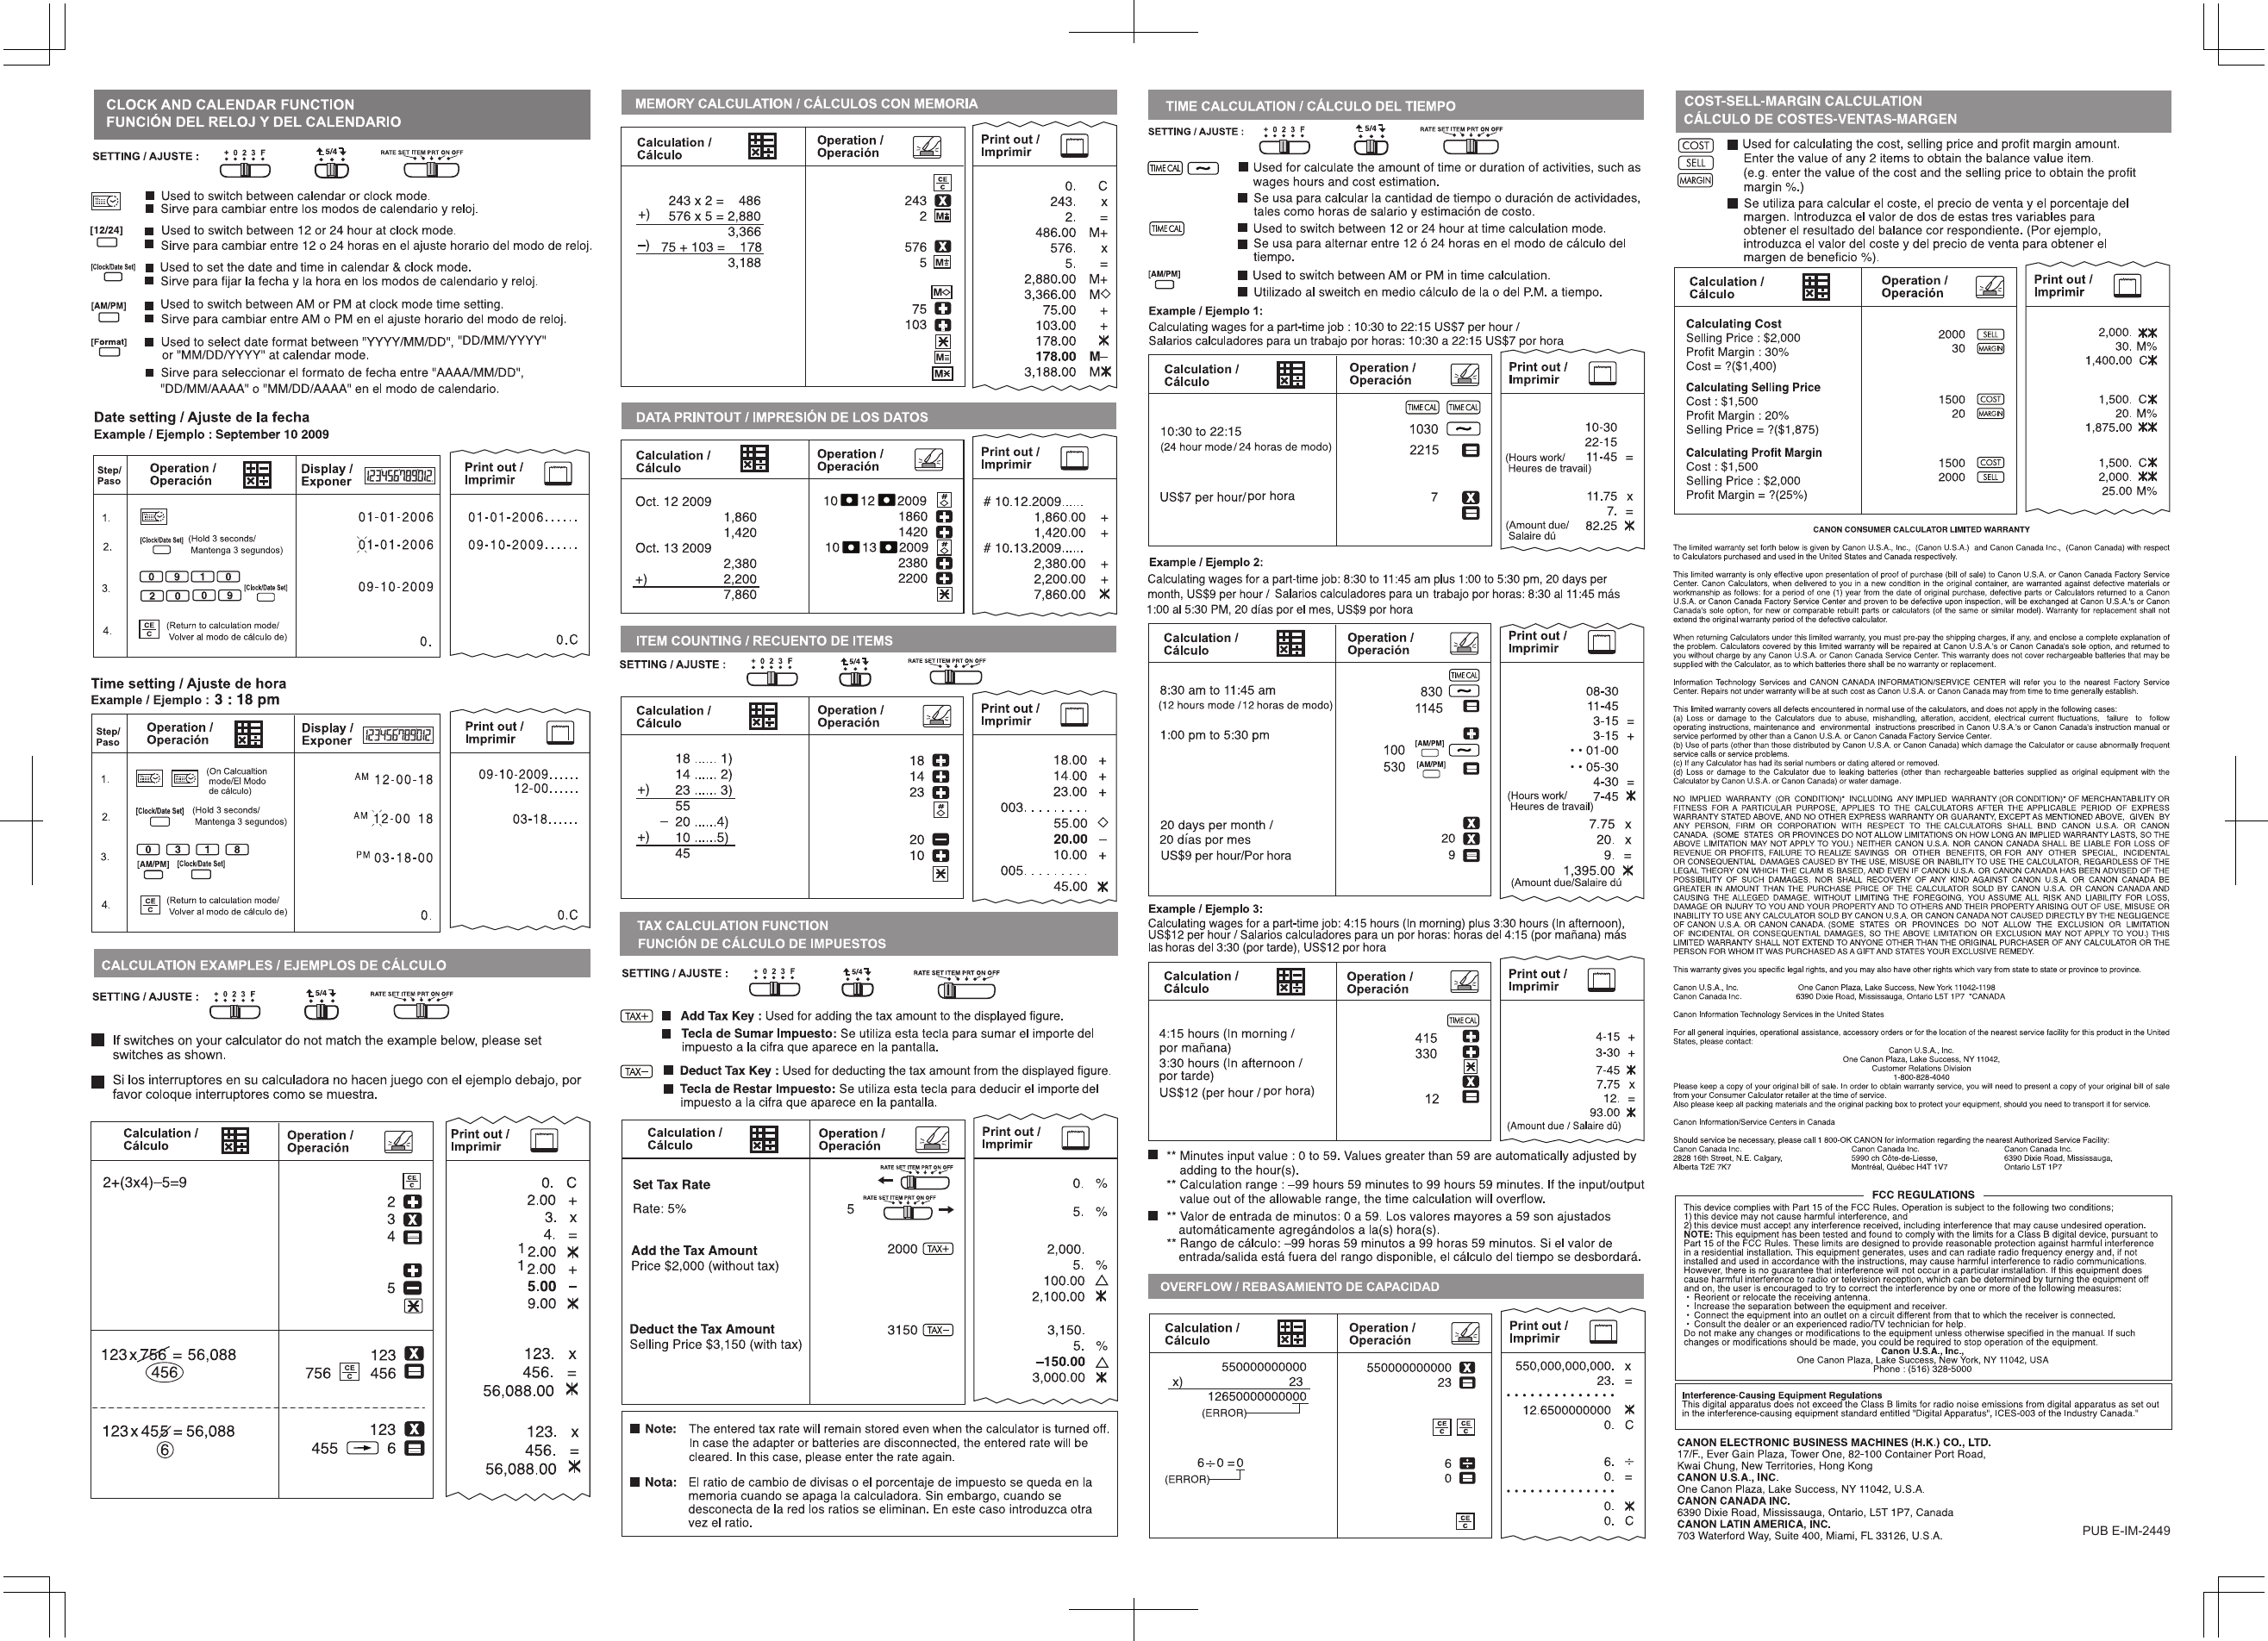 Page 2 of 2 - Canon P27-DH USA GB Front - 2 User Manual  To The D9874b4a-4cae-4aeb-abc1-c3b3a150cfbb